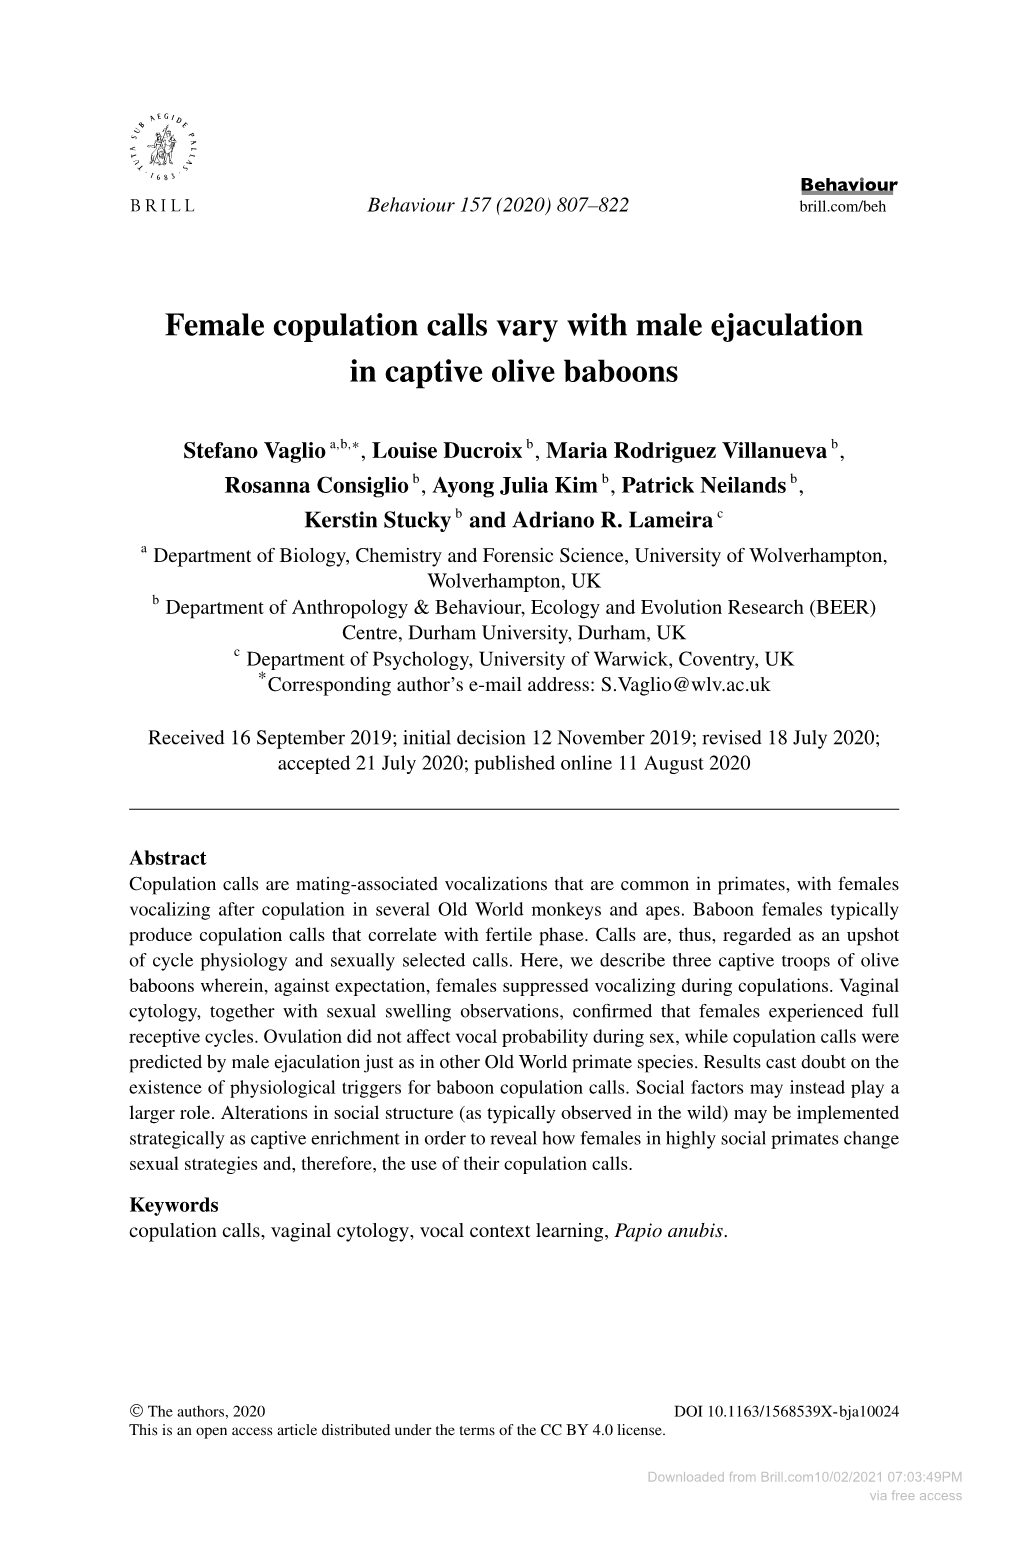 Female Copulation Calls Vary with Male Ejaculation in Captive Olive Baboons